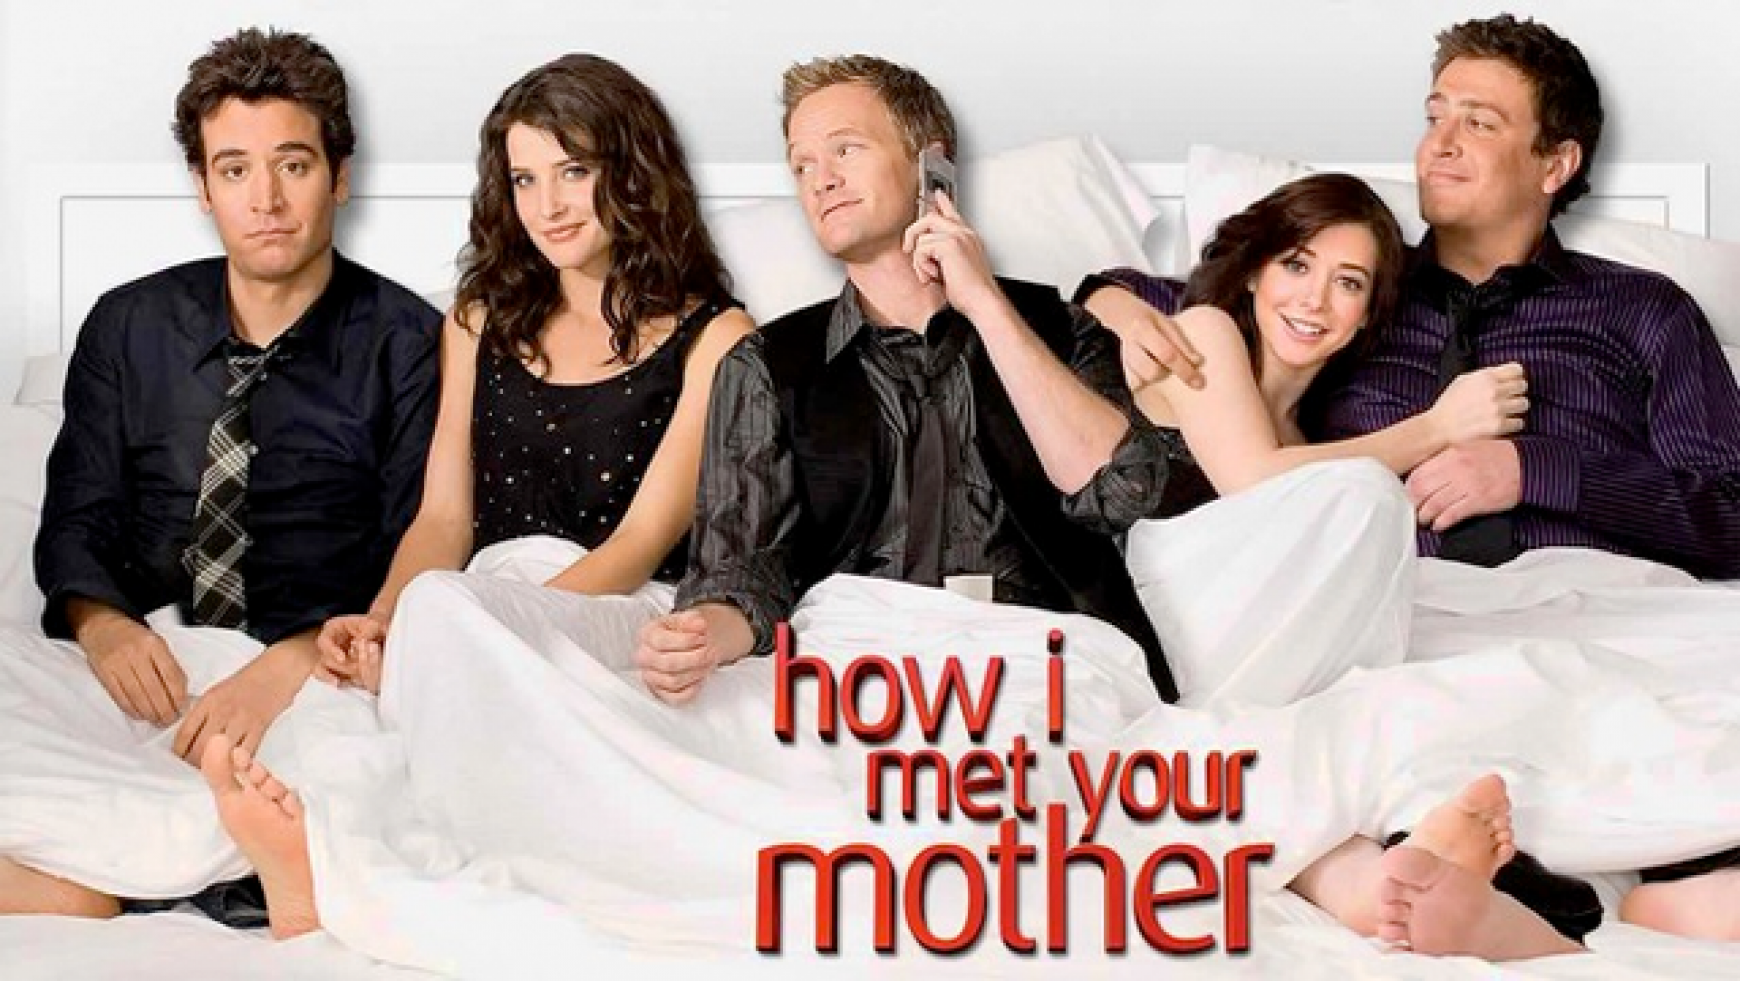 sit love life When we talk about Love and romance How I Met Your Mother